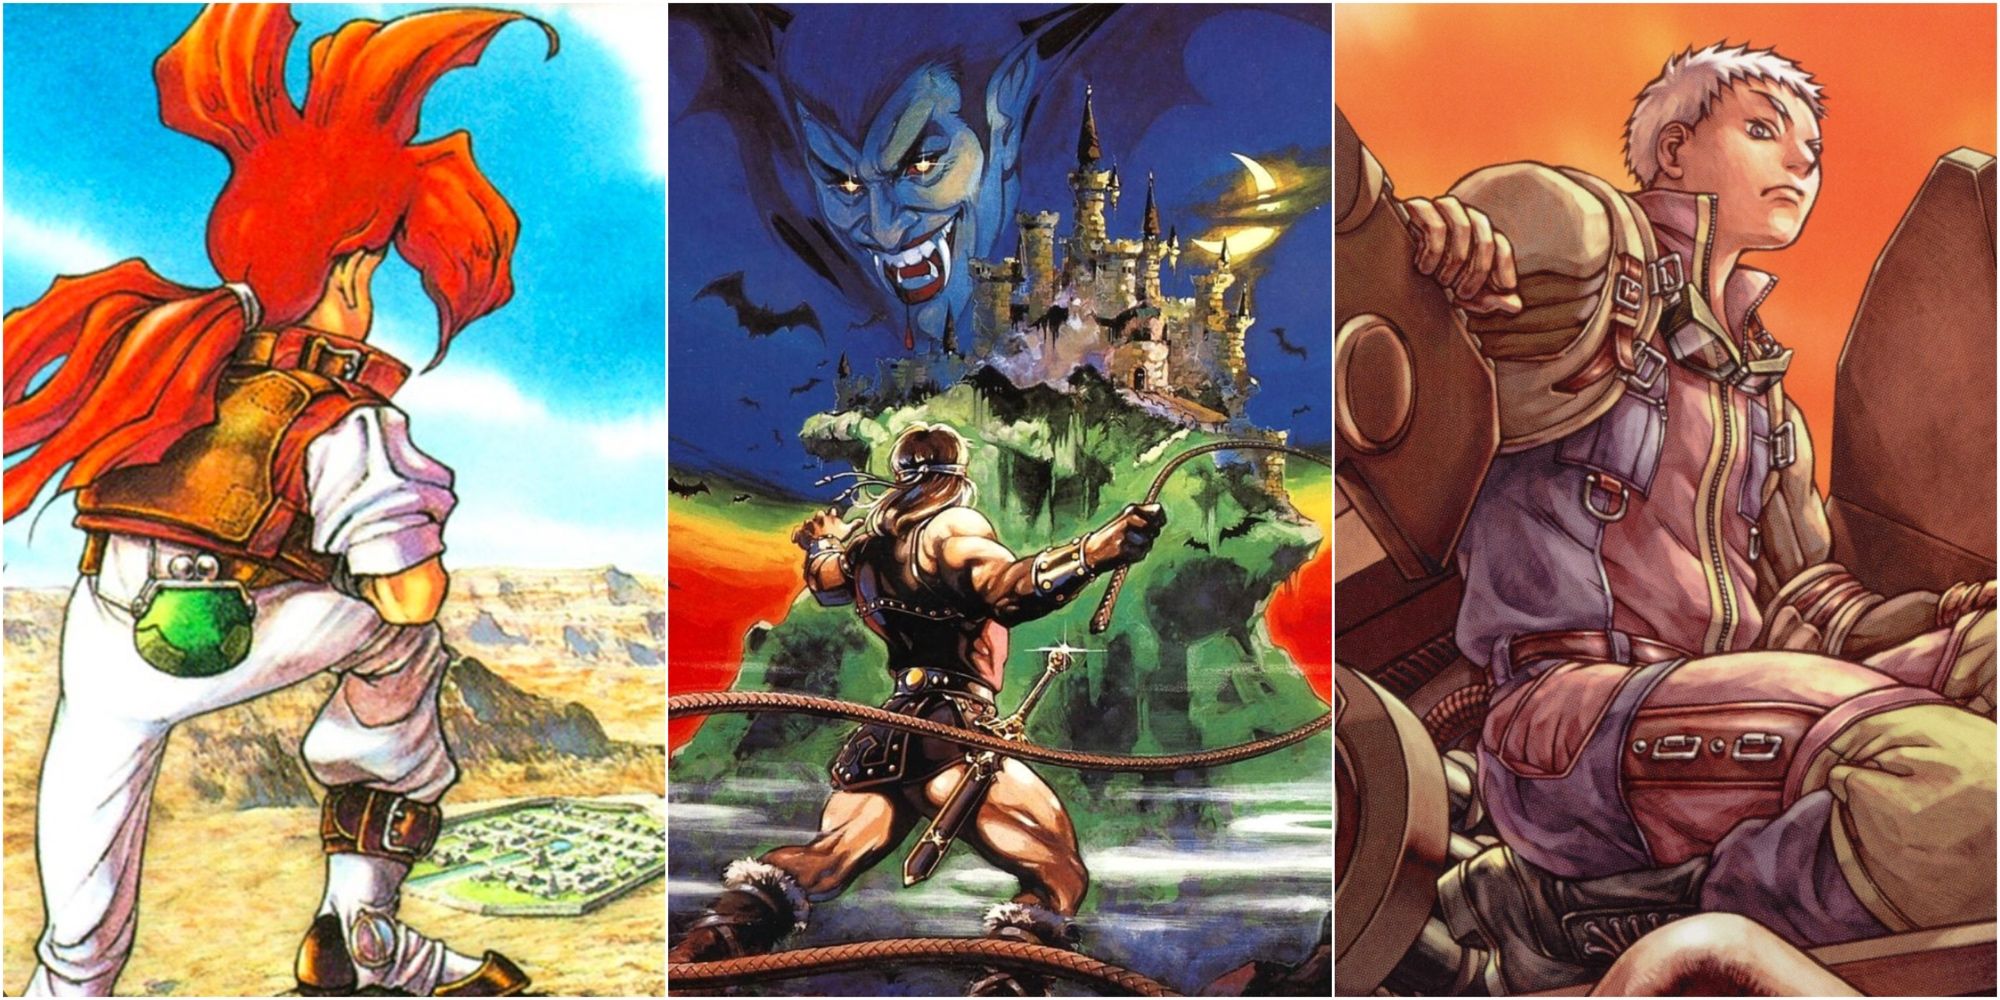 Astral Dreams, Castlevania, and Ring of Red